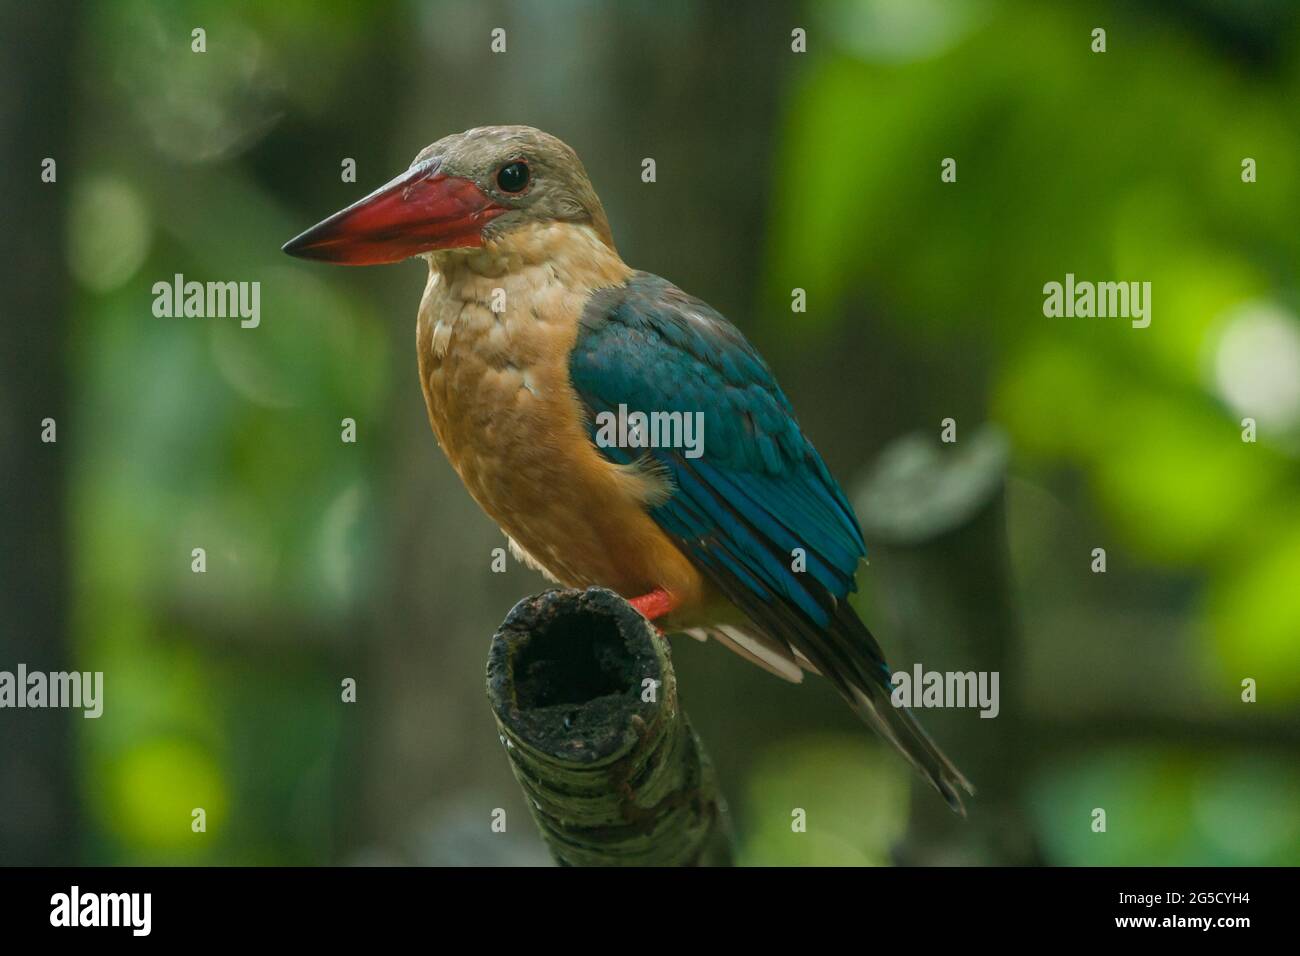 Stork-billed Kingfisher (Pelargopsis capensis) with large scarlet bill found predominantly in south asia and the Indian sub-continent. Stock Photo